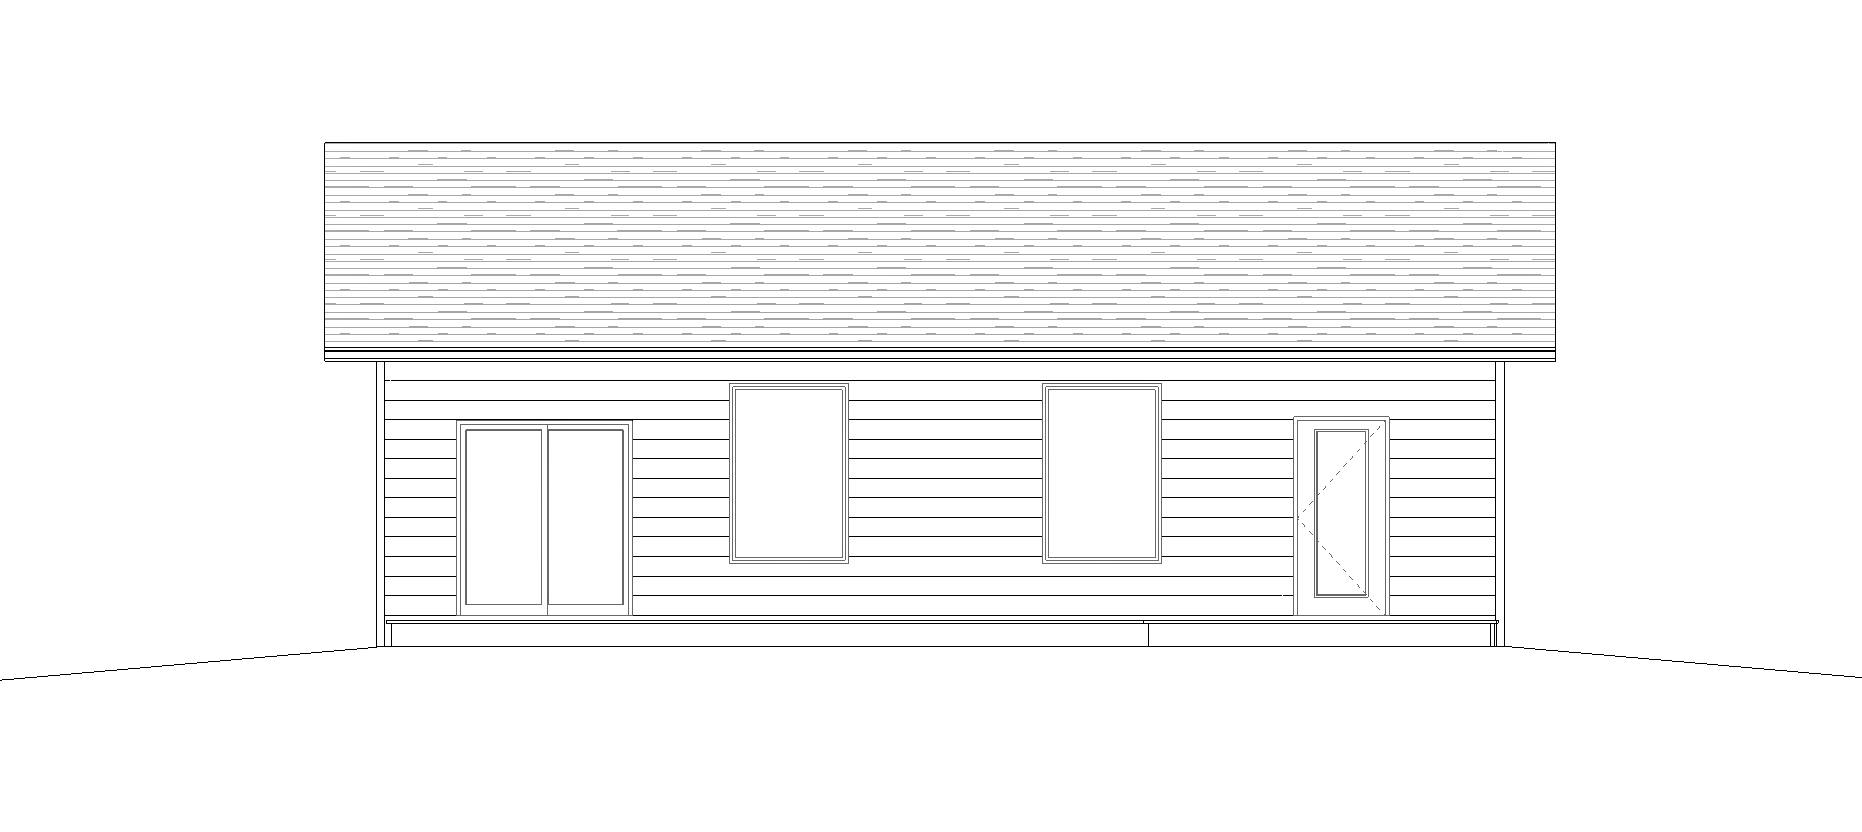 Penner Homes Elevation Map Id: 403